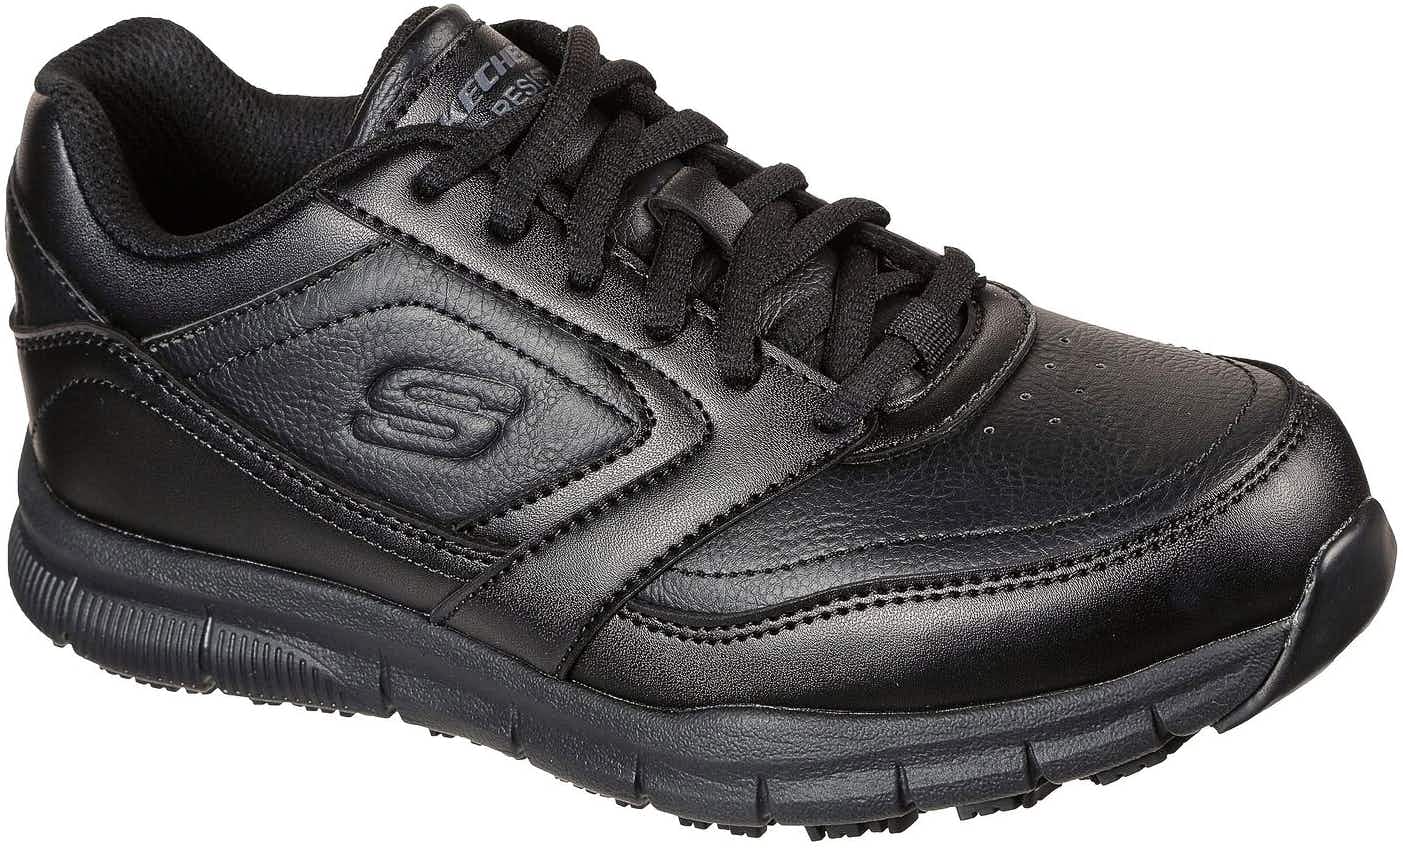 A Skechers Work Relaxed Fit: Nampa Wyola SR shoe on a white background.